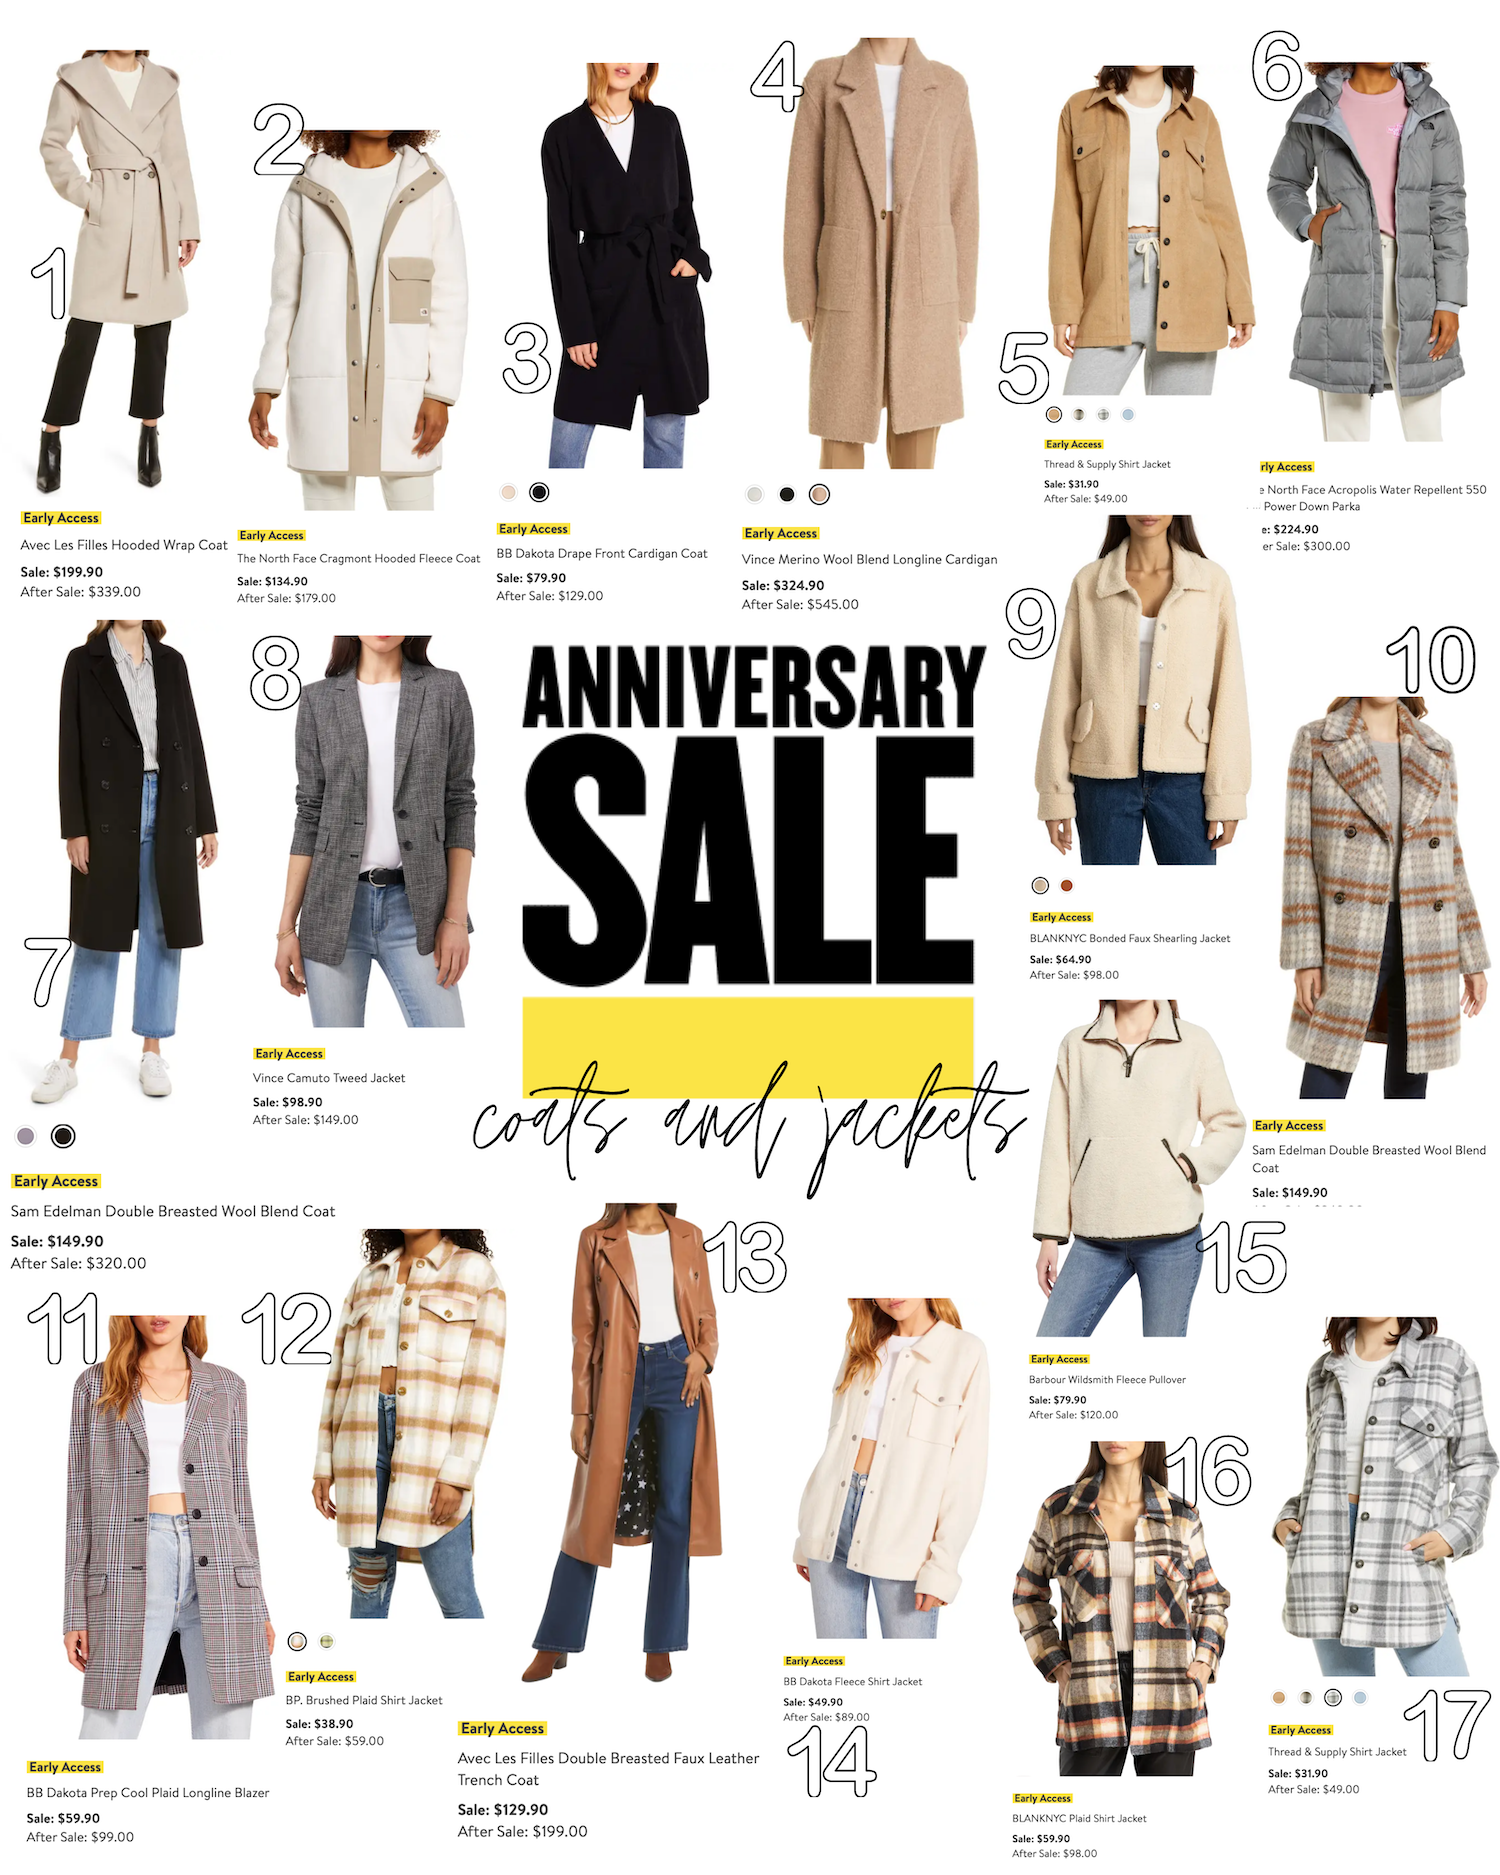 Nordstrom Sale 2021 Roundup The best coats and jackets daily dose of charm nsale Lauren Emily Lindmark